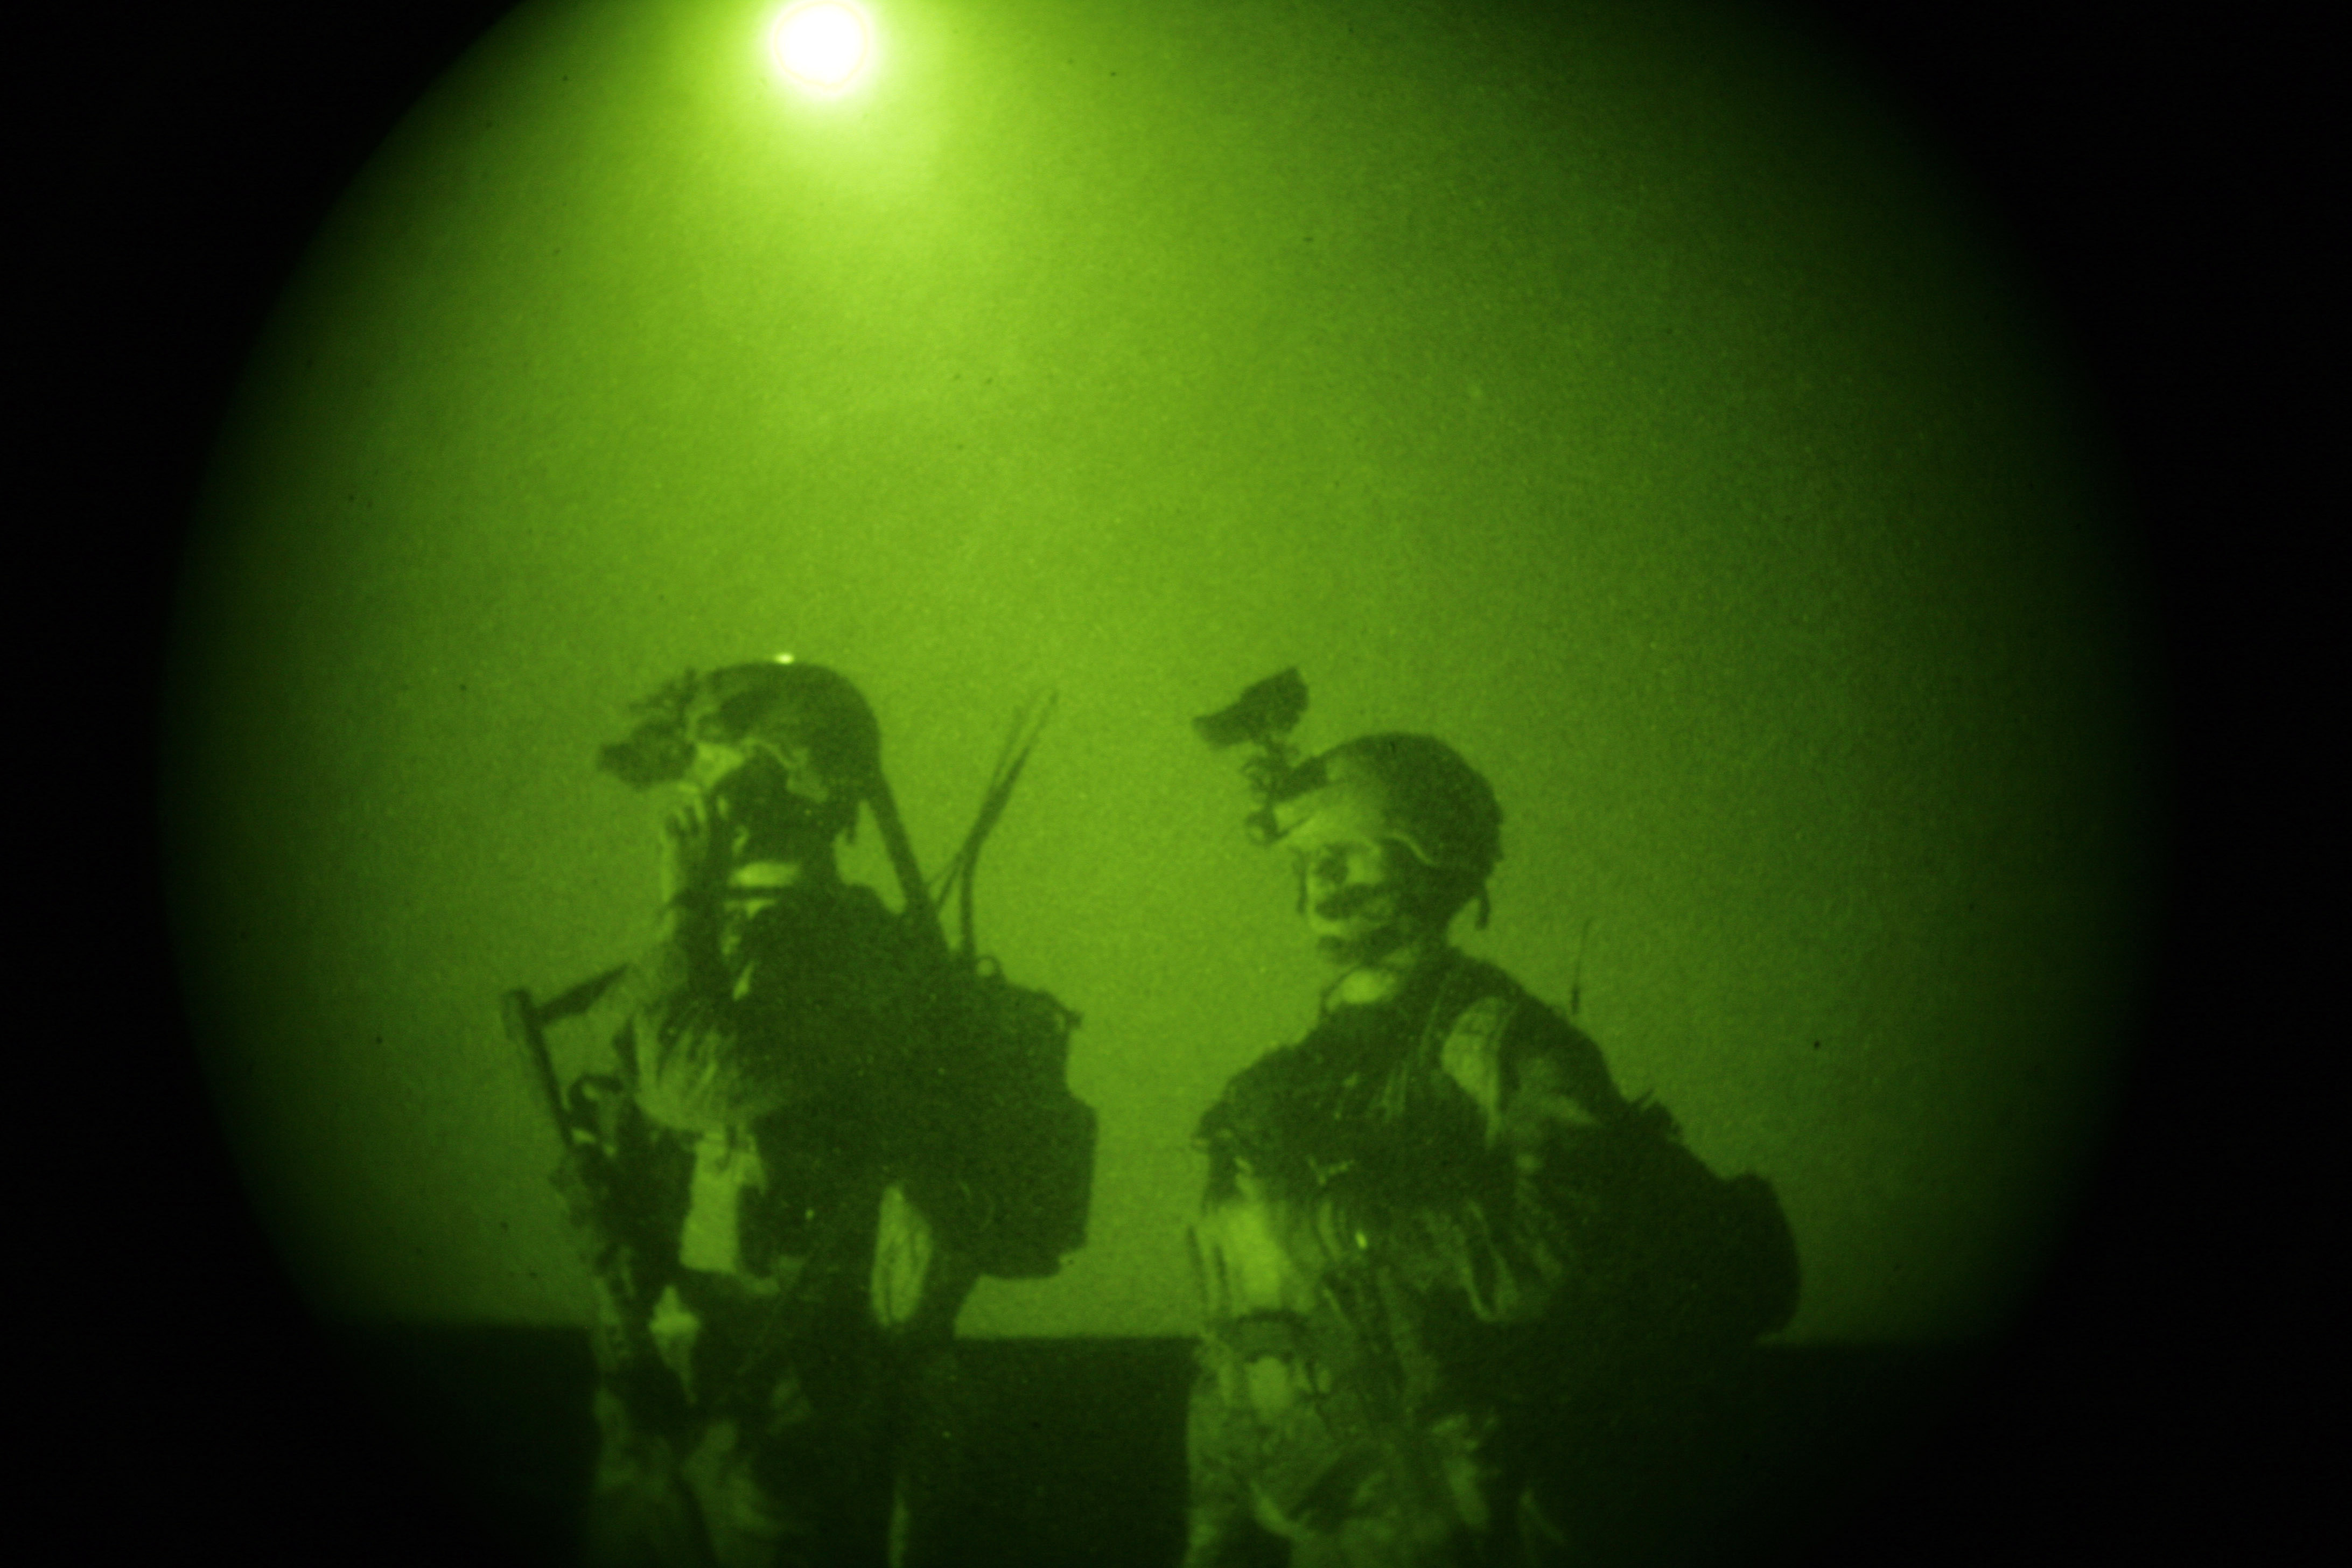 U.S. Special Forces in Afghanistan, 2009.